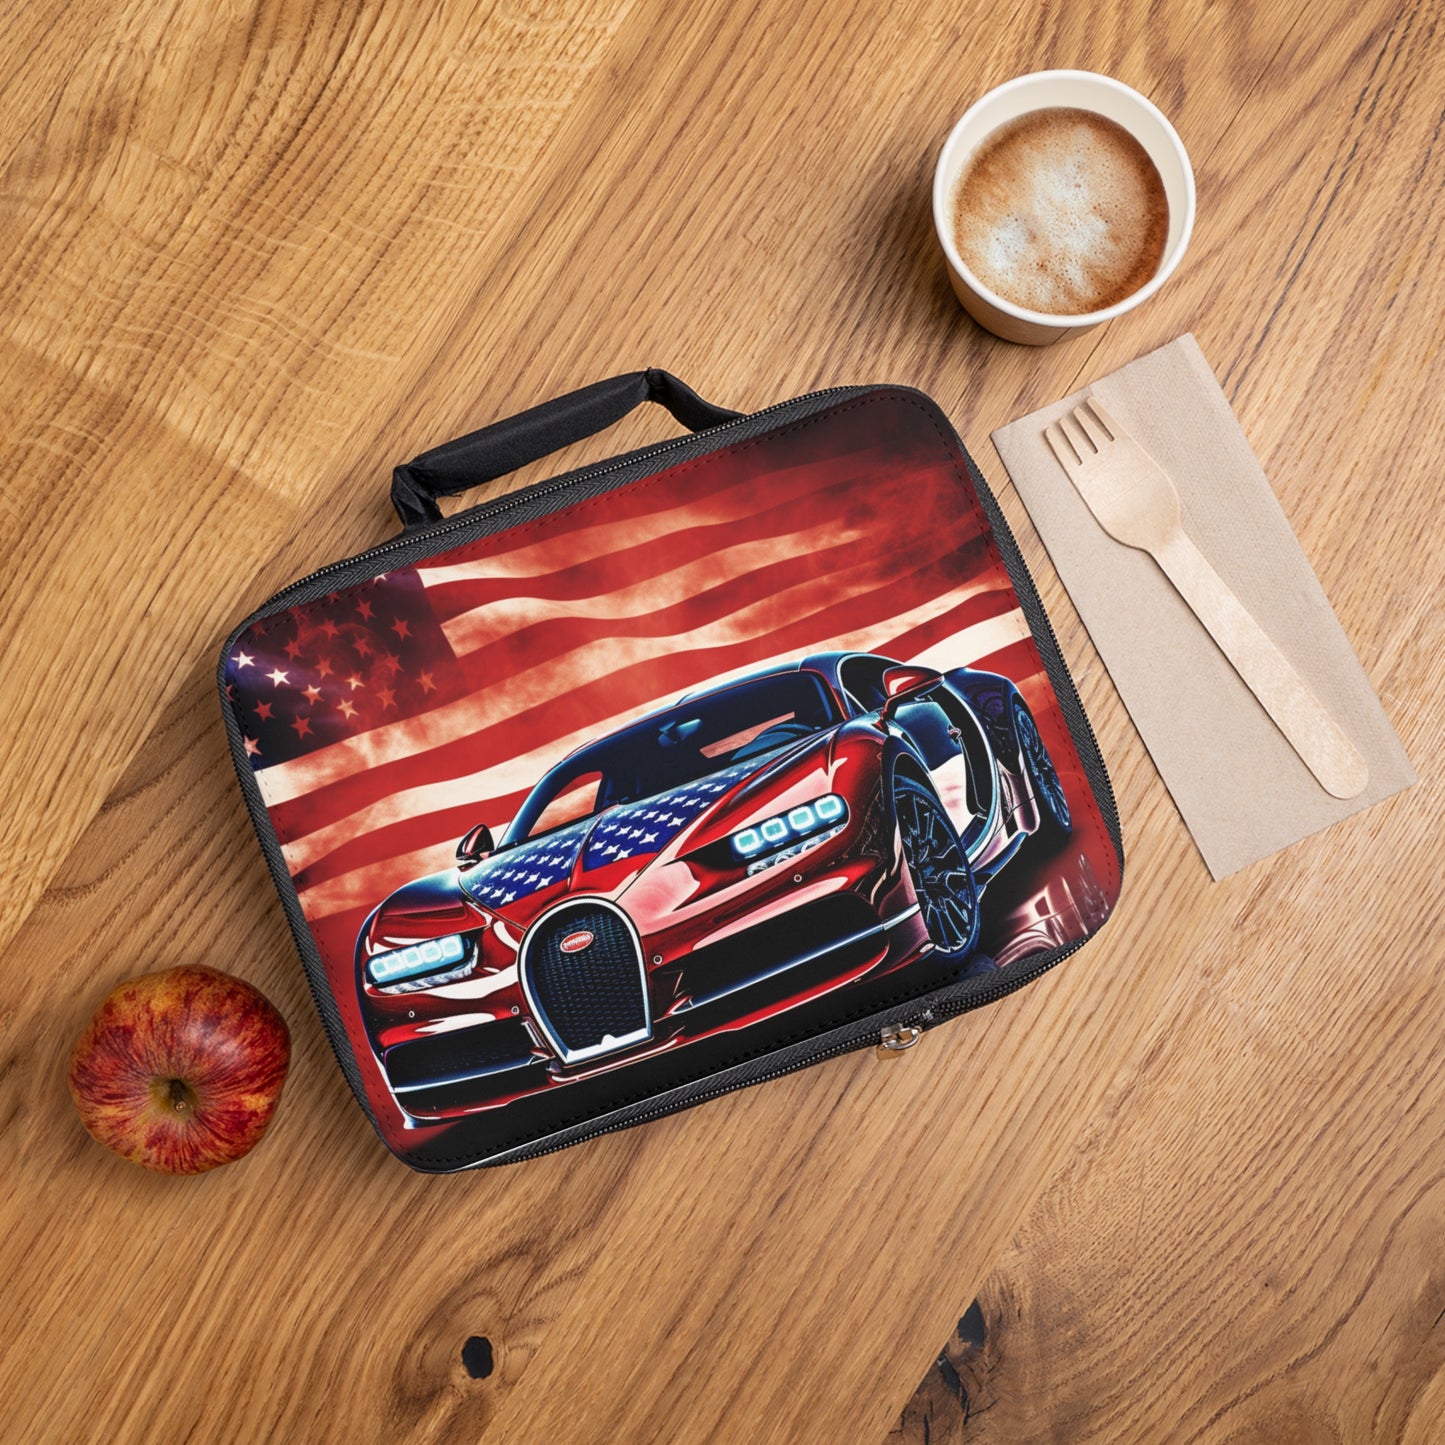 Lunch Bag Abstract American Flag Background Bugatti 3